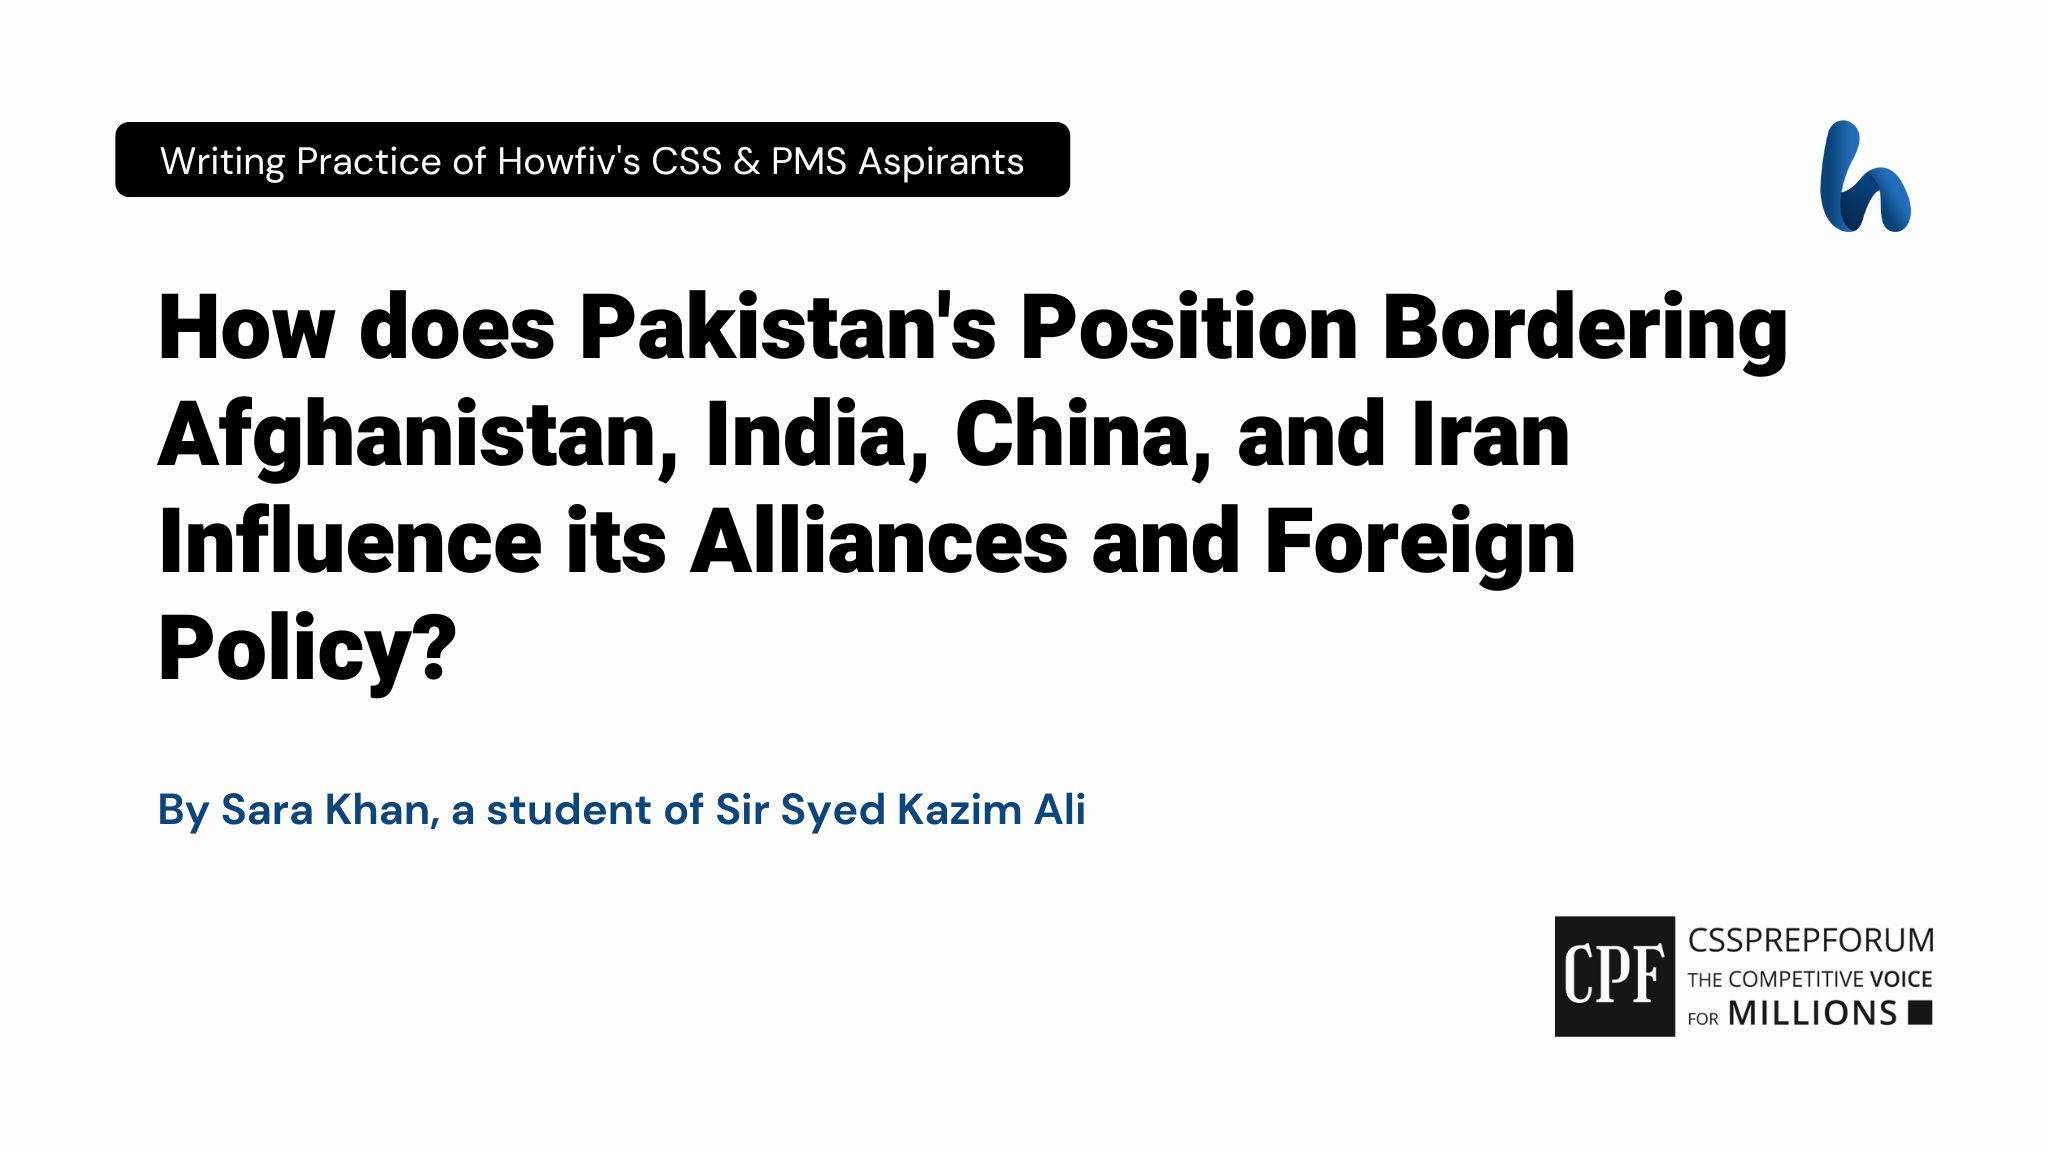 Pakistan's Foreign Policy by Sara Khan